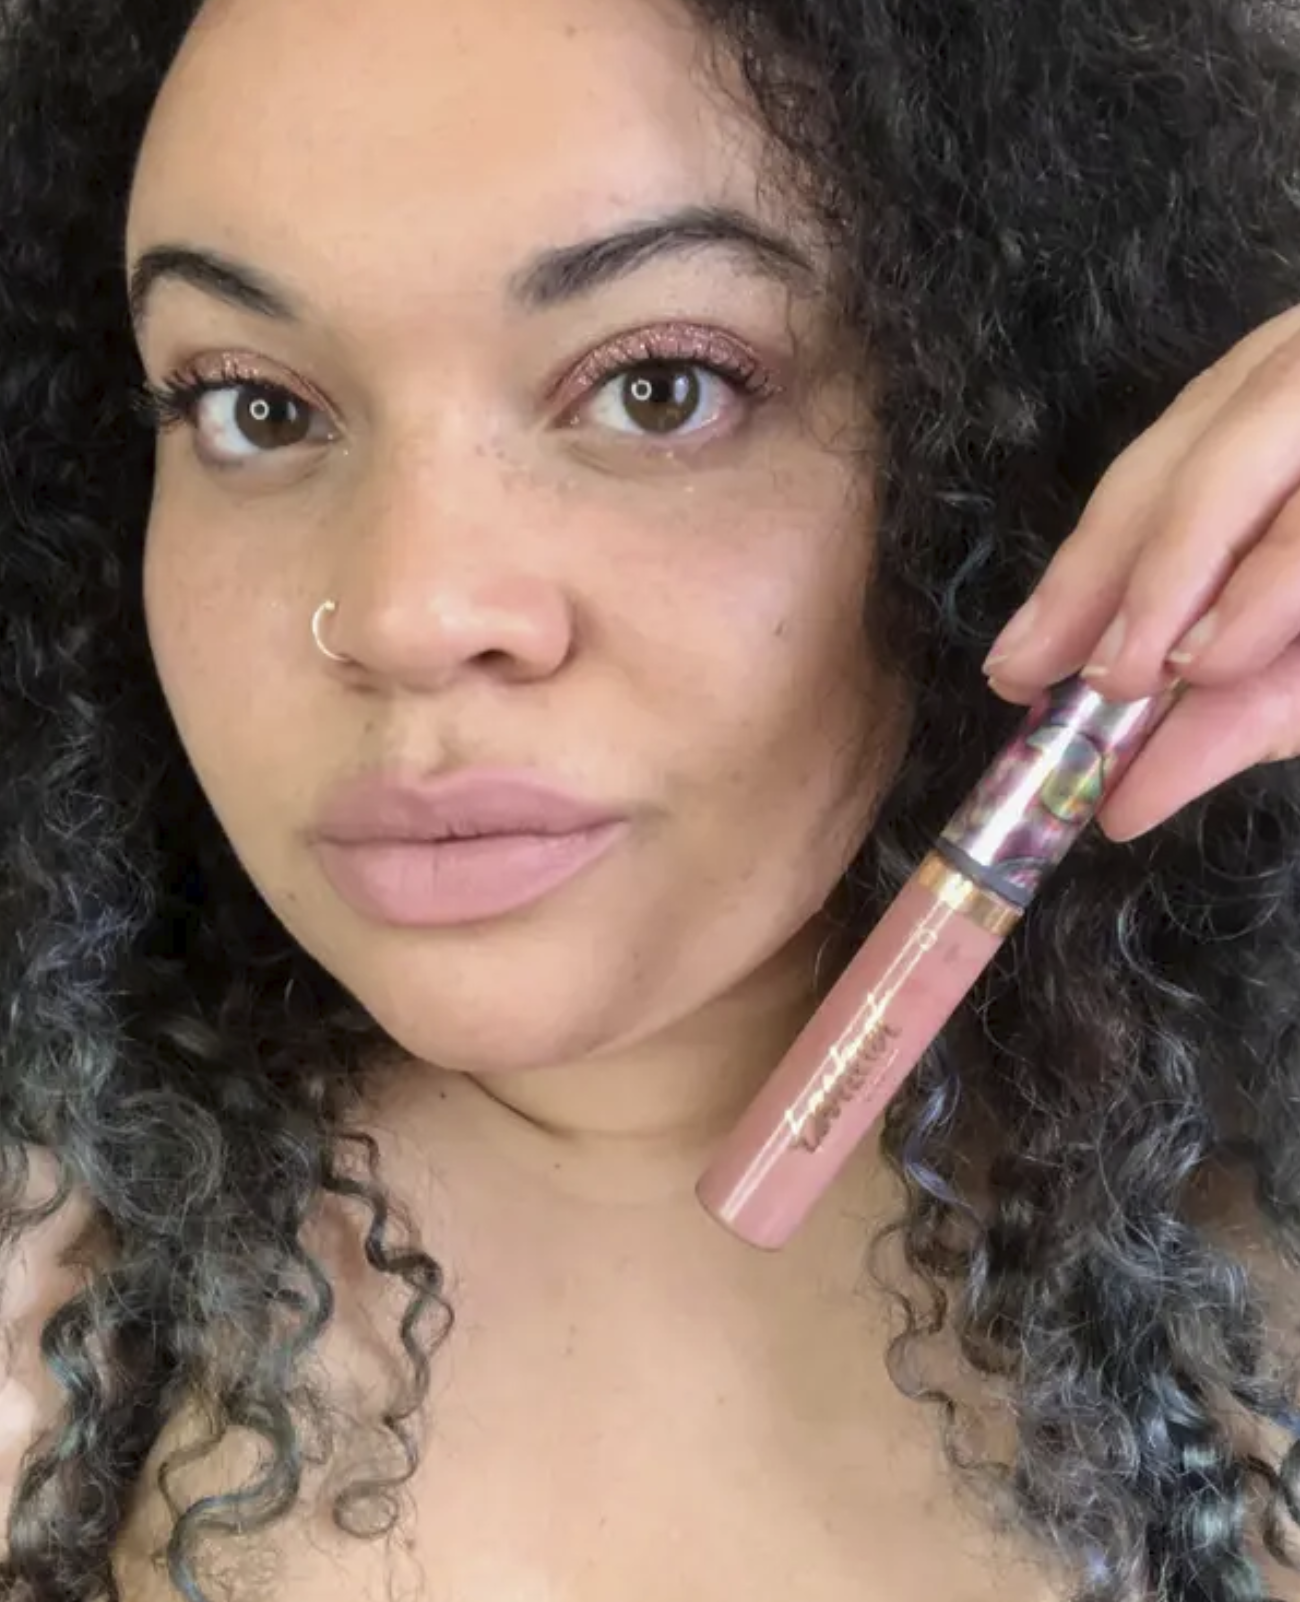 BuzzFeed editor wearing a nude pink lipstick and holding the tube near her face